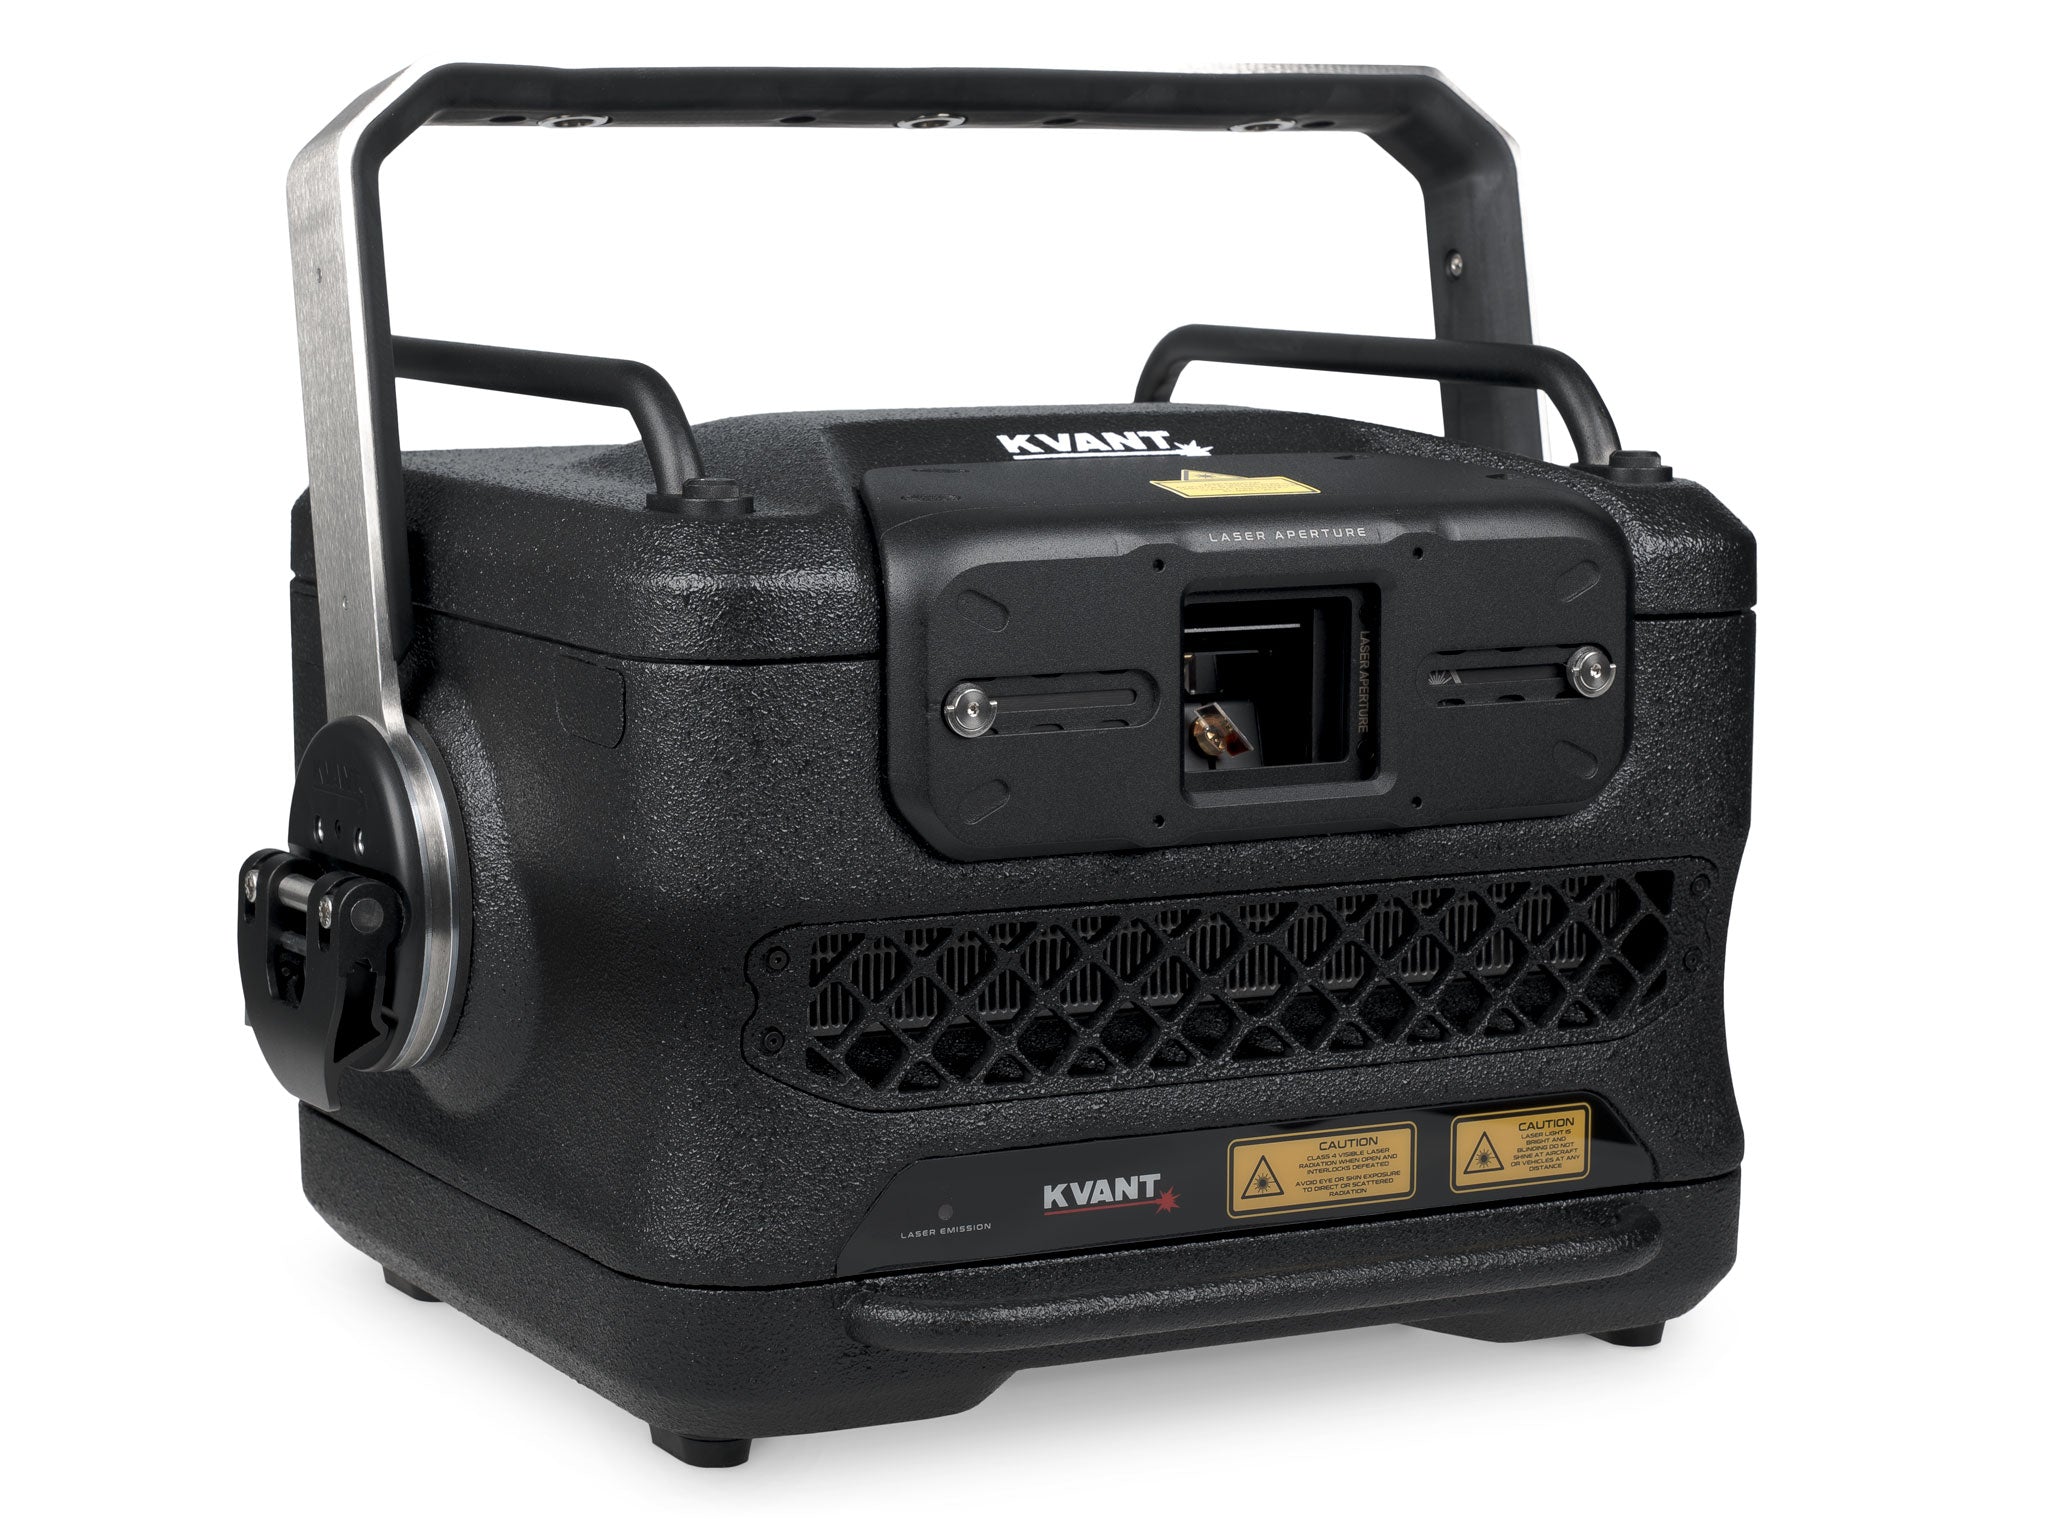 Kvant Lasers - Atom 58 touring professional laser display projector_1